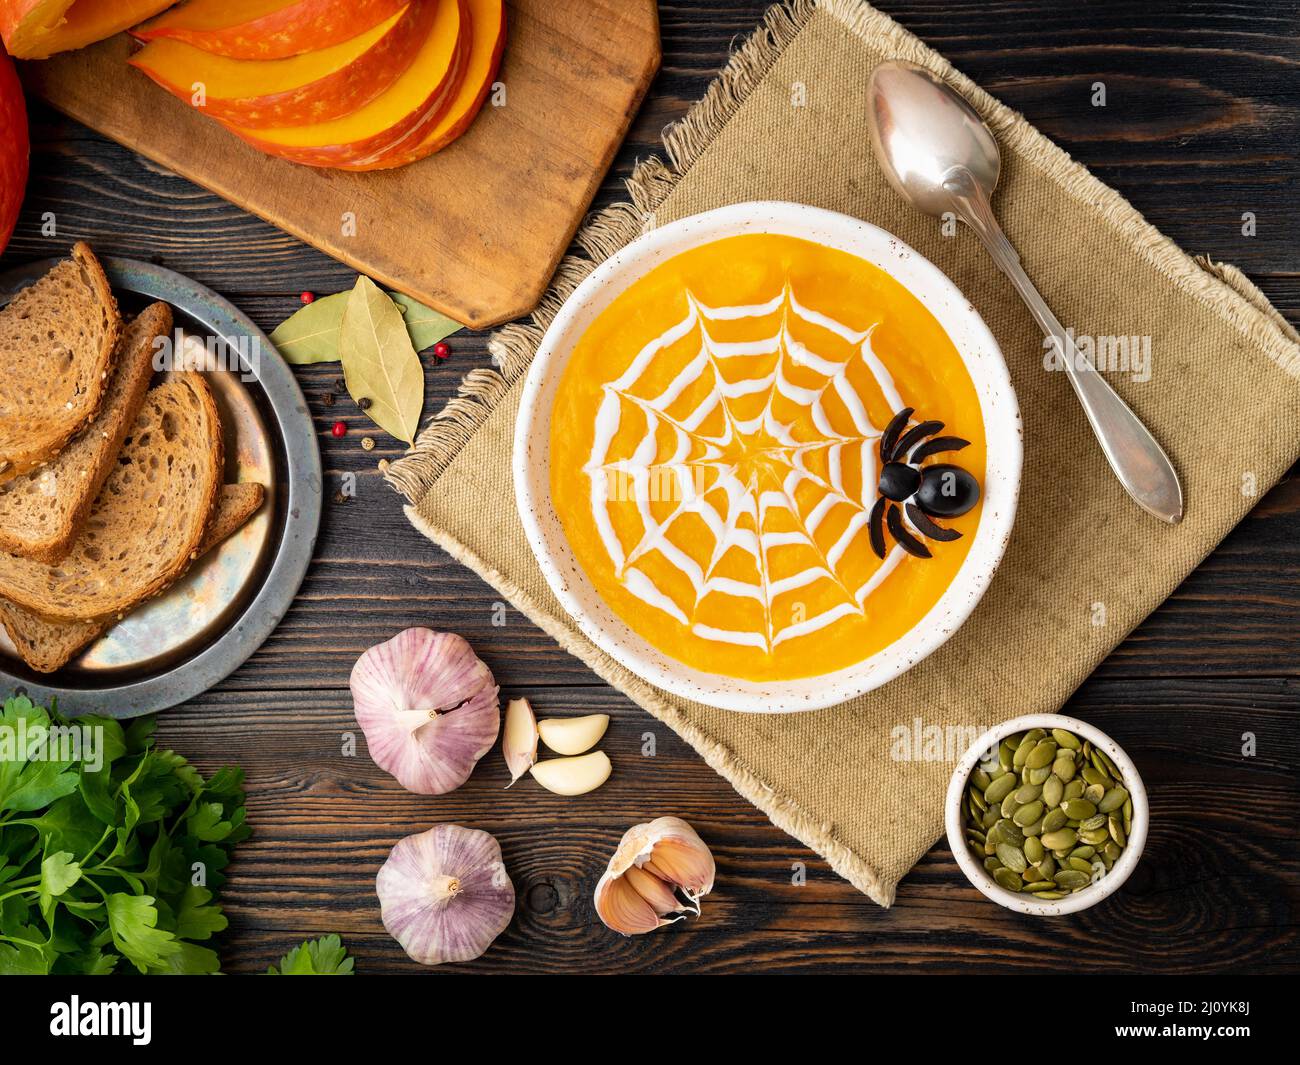 Funny food for Halloween. Pumpkin puree soup, spider web, dark old wooden table, top view. Stock Photo